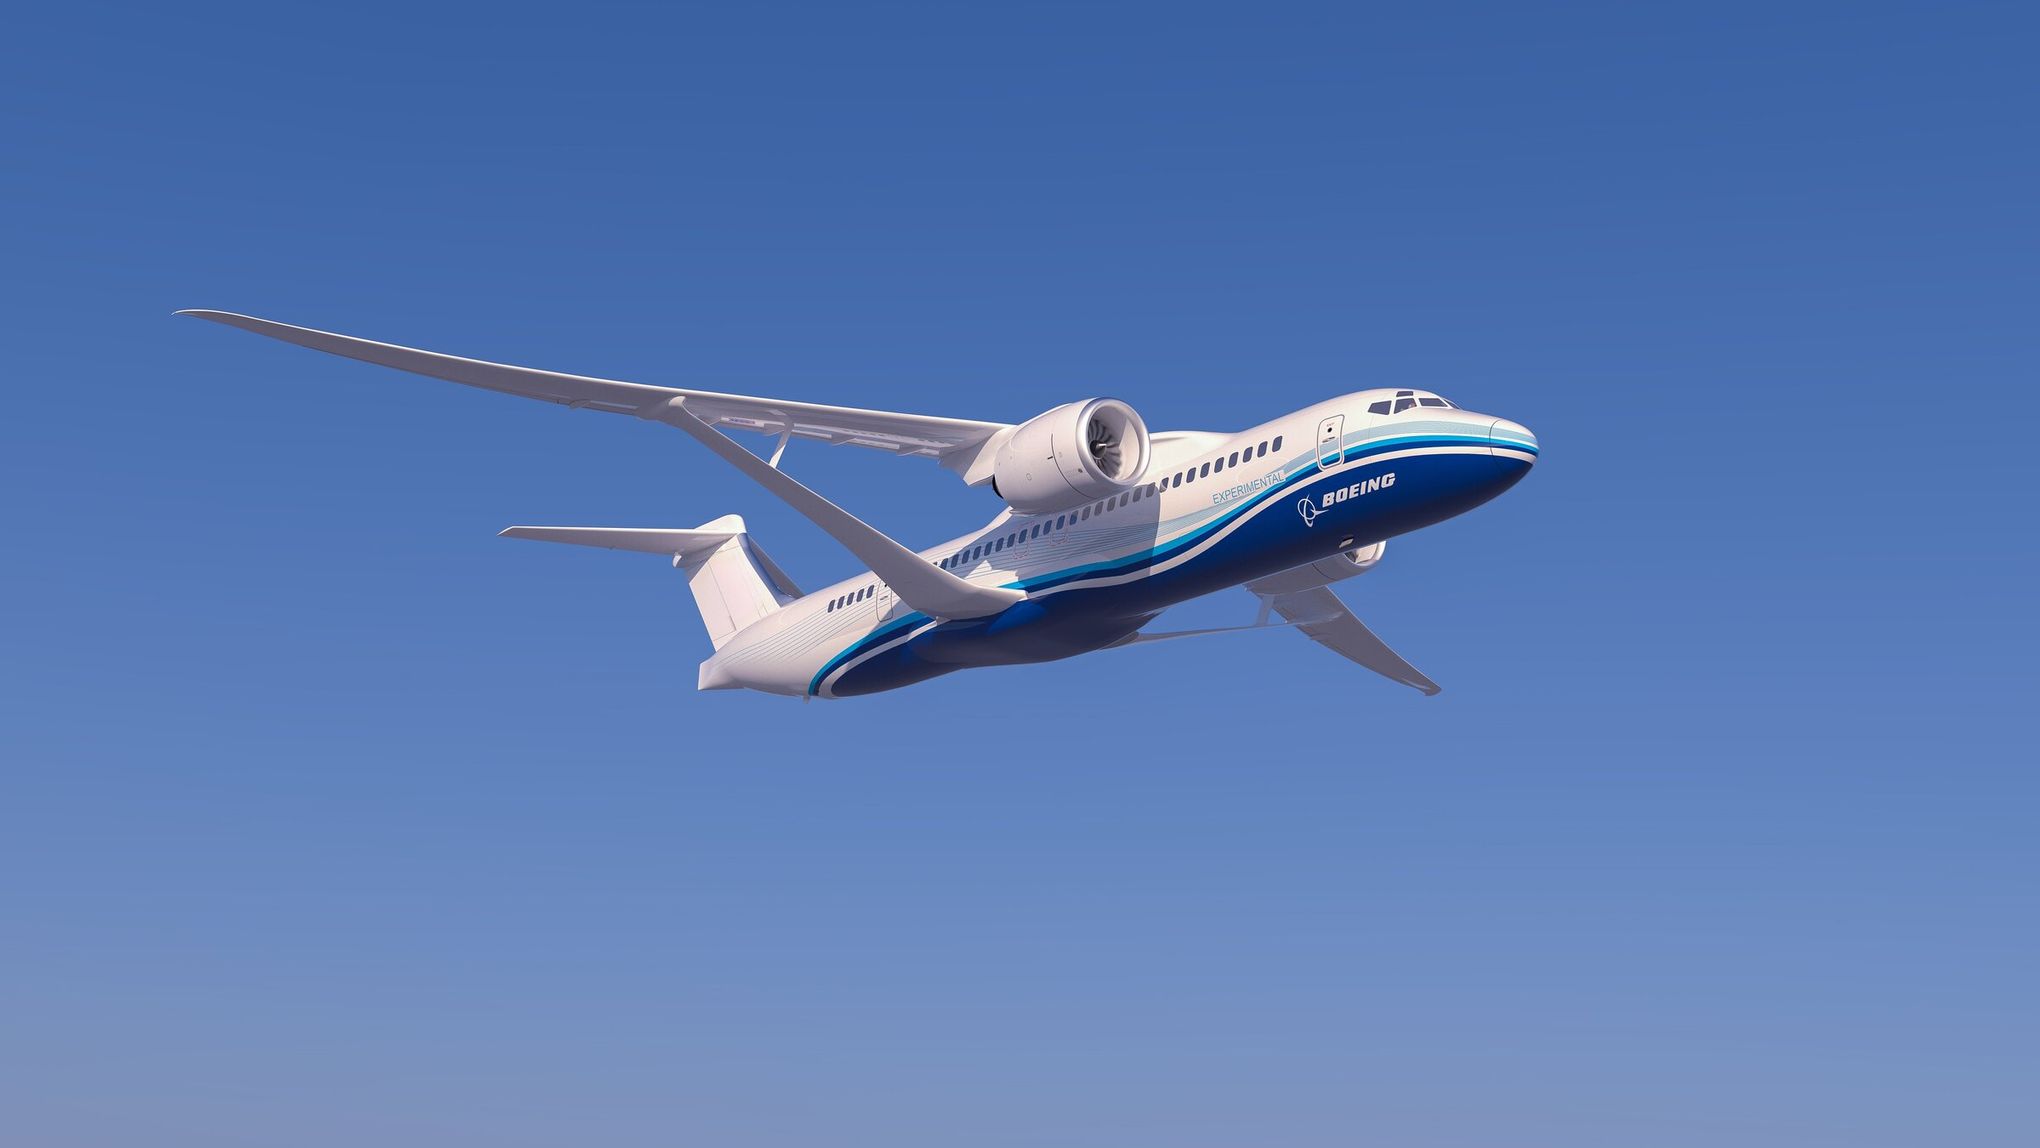 In Paris, Boeing leader teases eye-catching new airplane concept